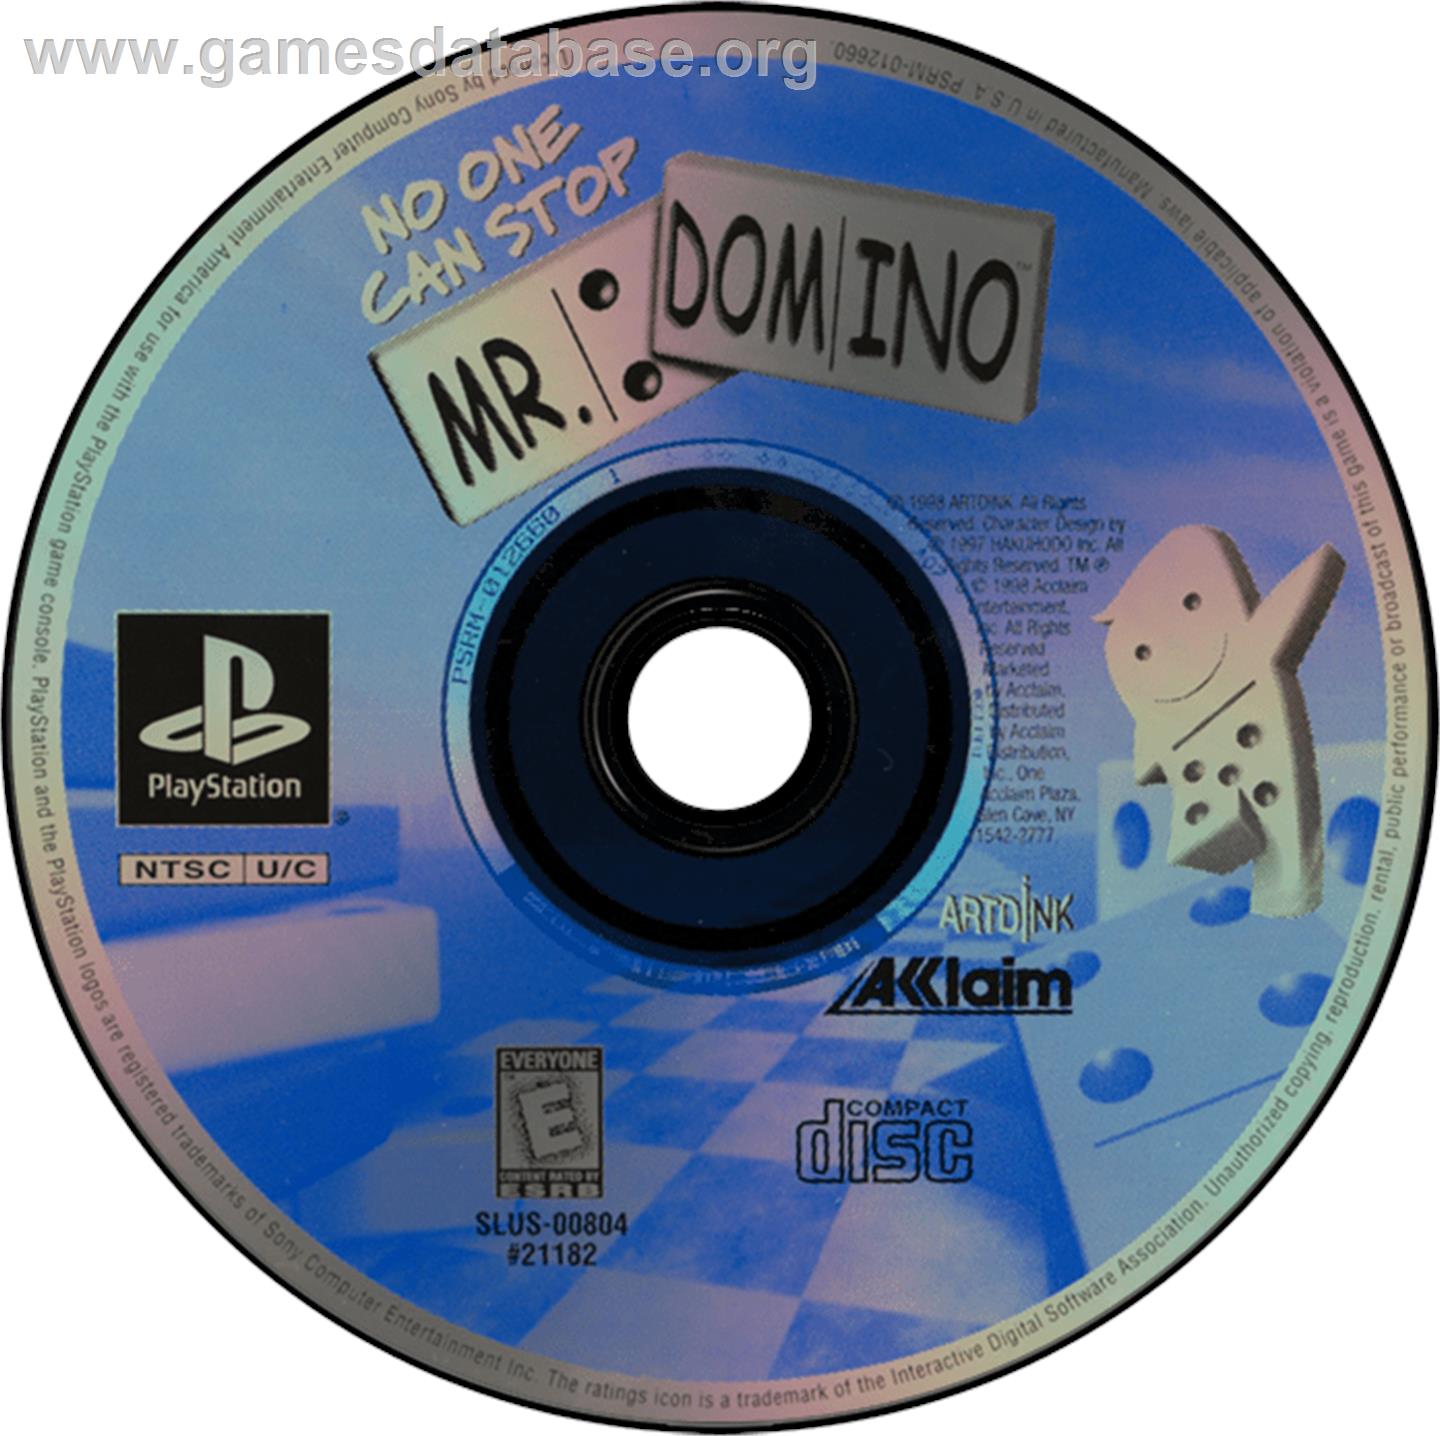 No One Can Stop Mr. Domino - Sony Playstation - Artwork - Disc